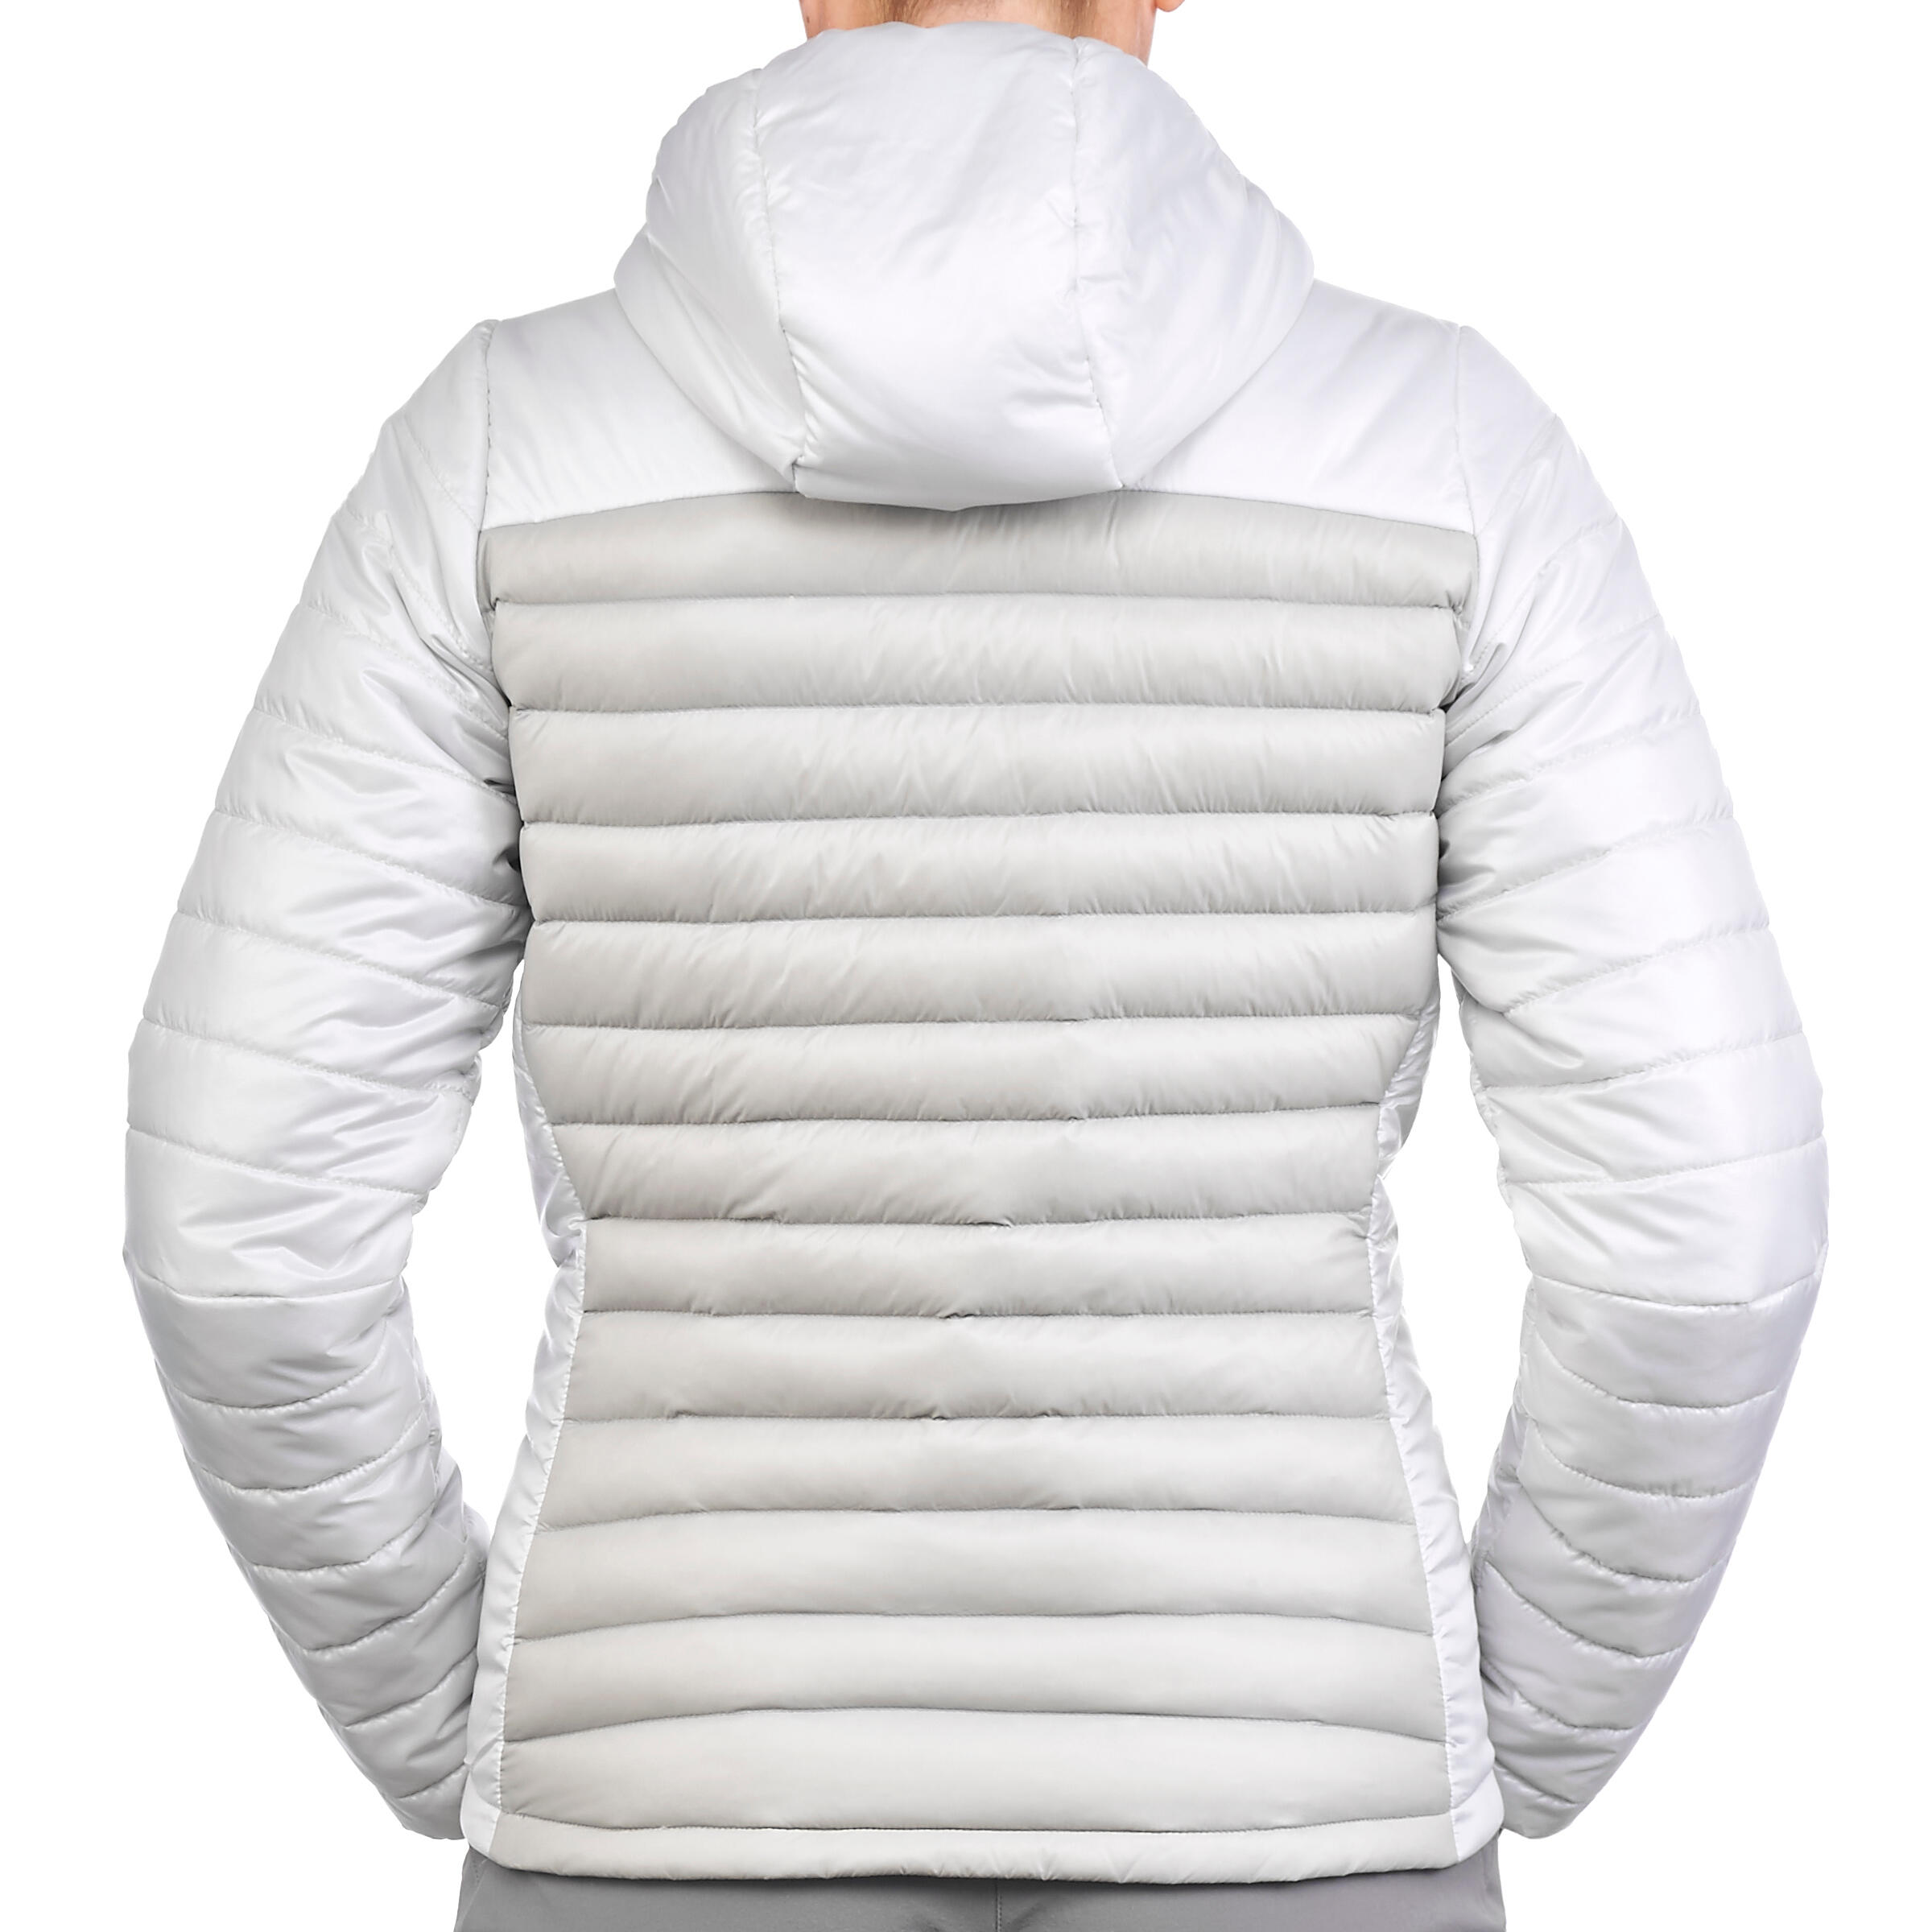 X-Light Women's Quilted Hiking Jacket - Light grey 5/15